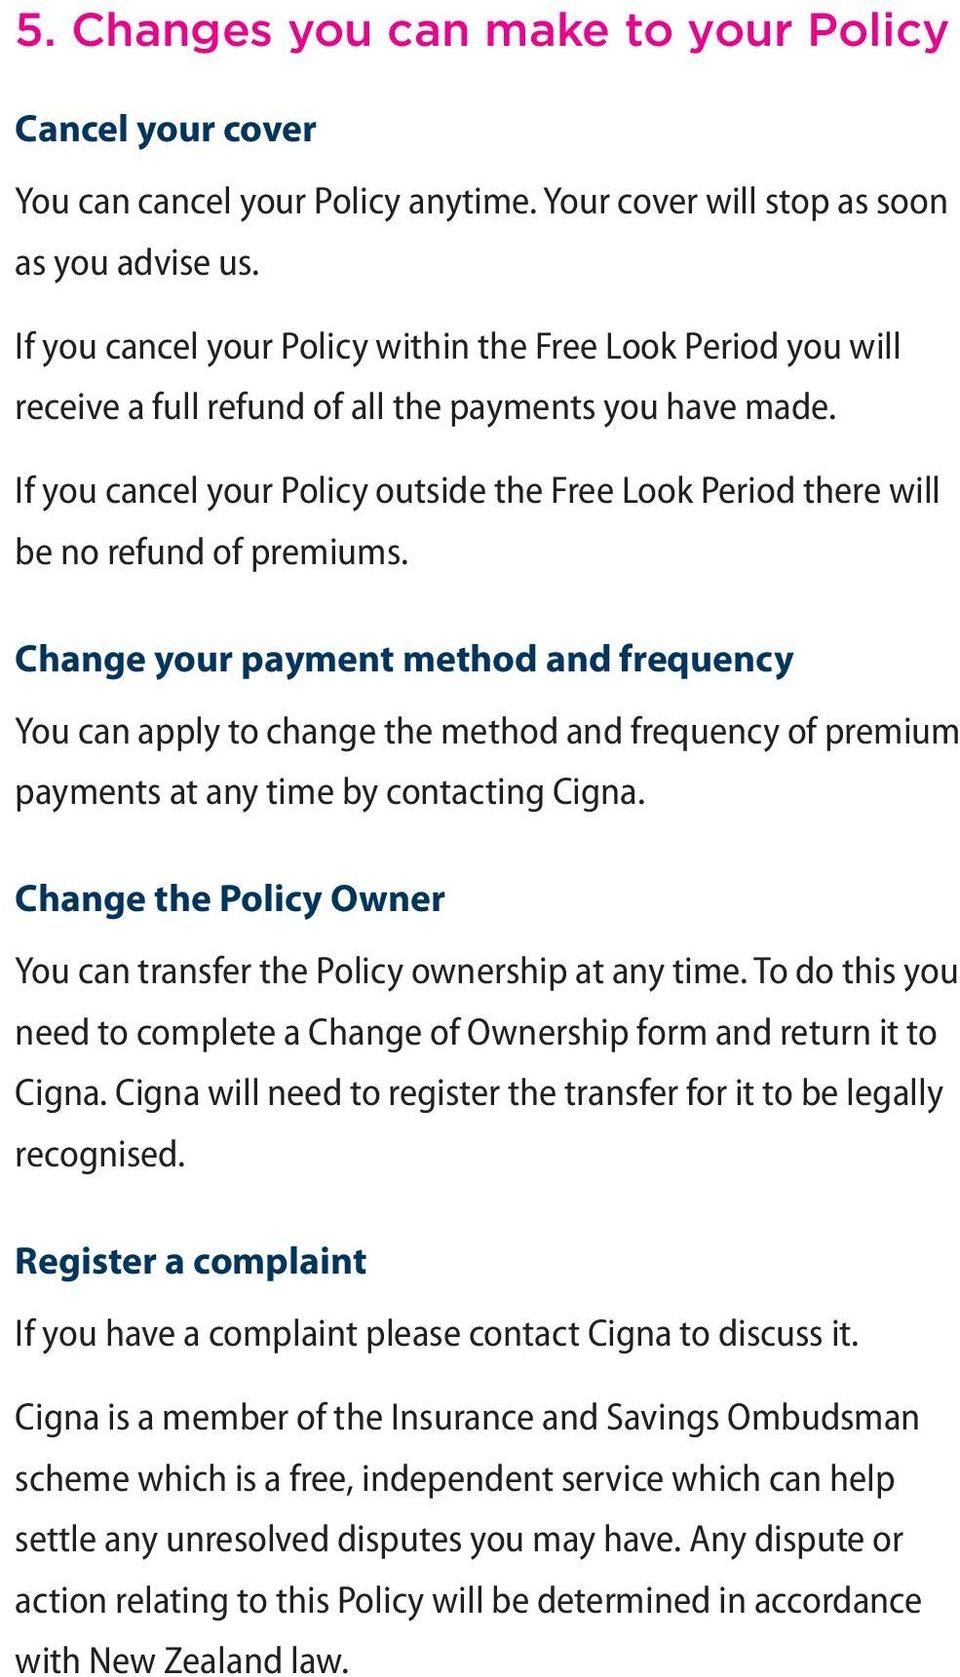 If you cancel your Policy outside the Free Look Period there will be no refund of premiums.